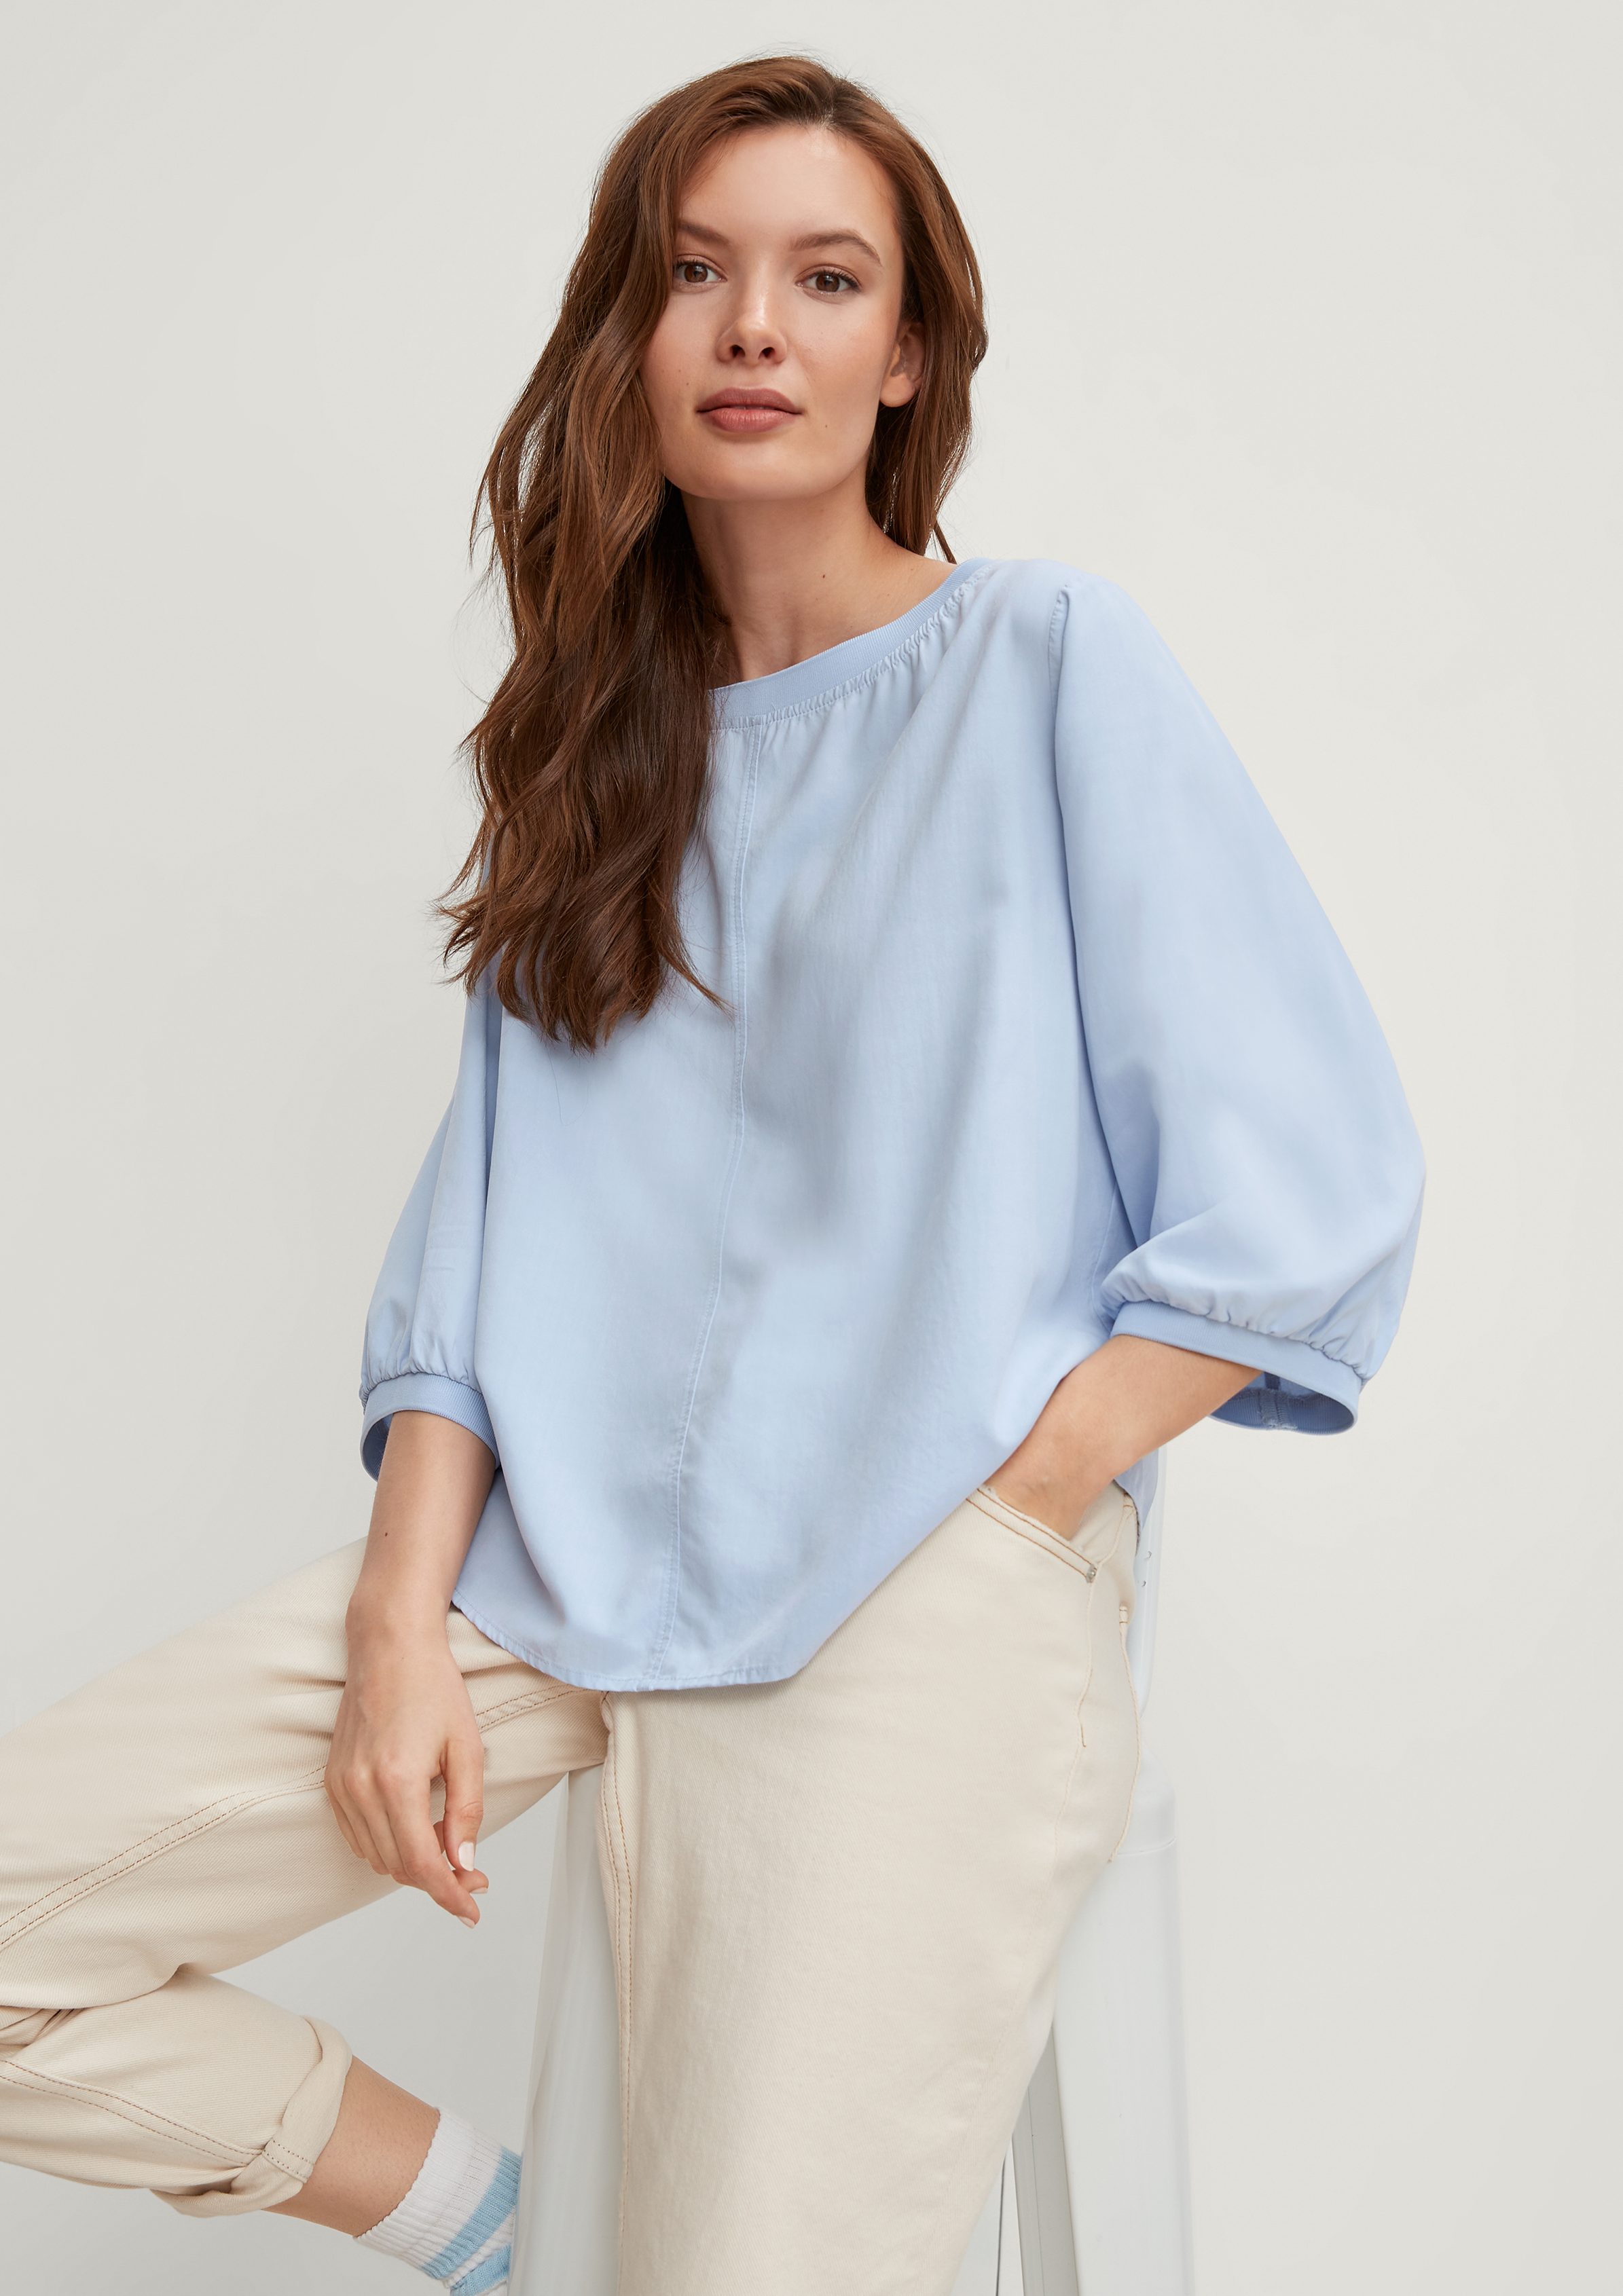 Bluse Loose-Fit comma im casual identity 3/4-Arm-Shirt